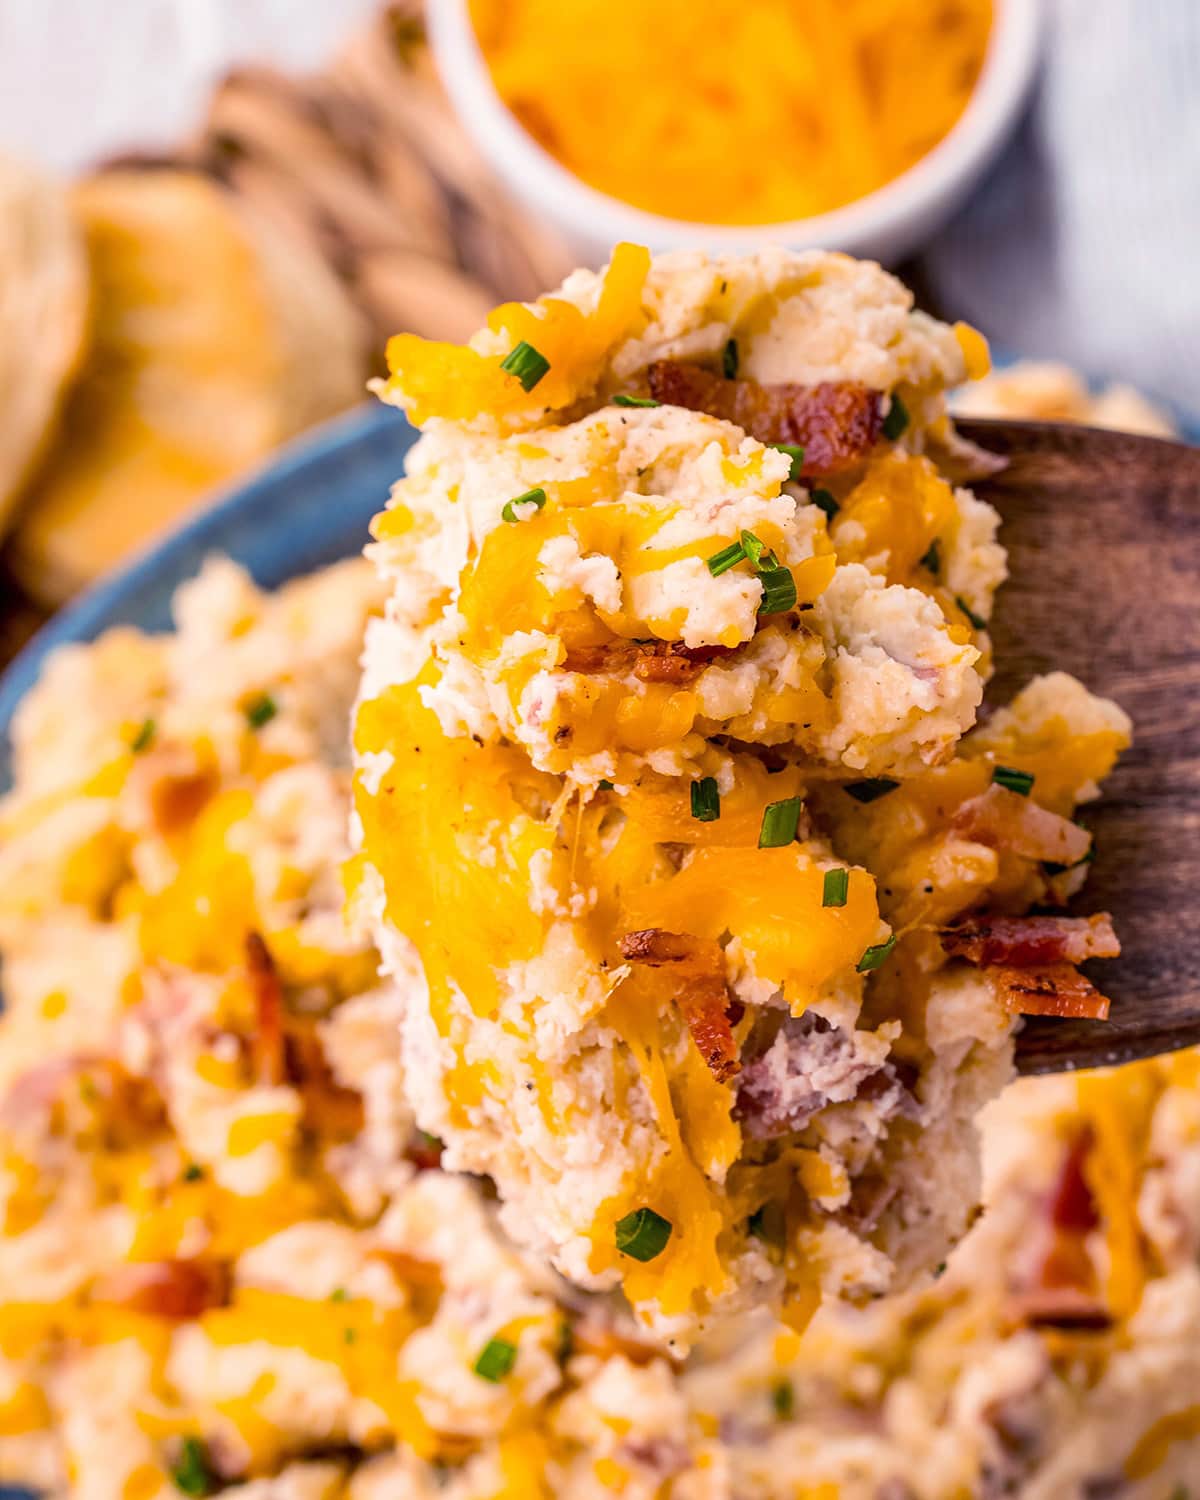 A big spoonful of loaded mashed potatoes covered in cheddar cheese.